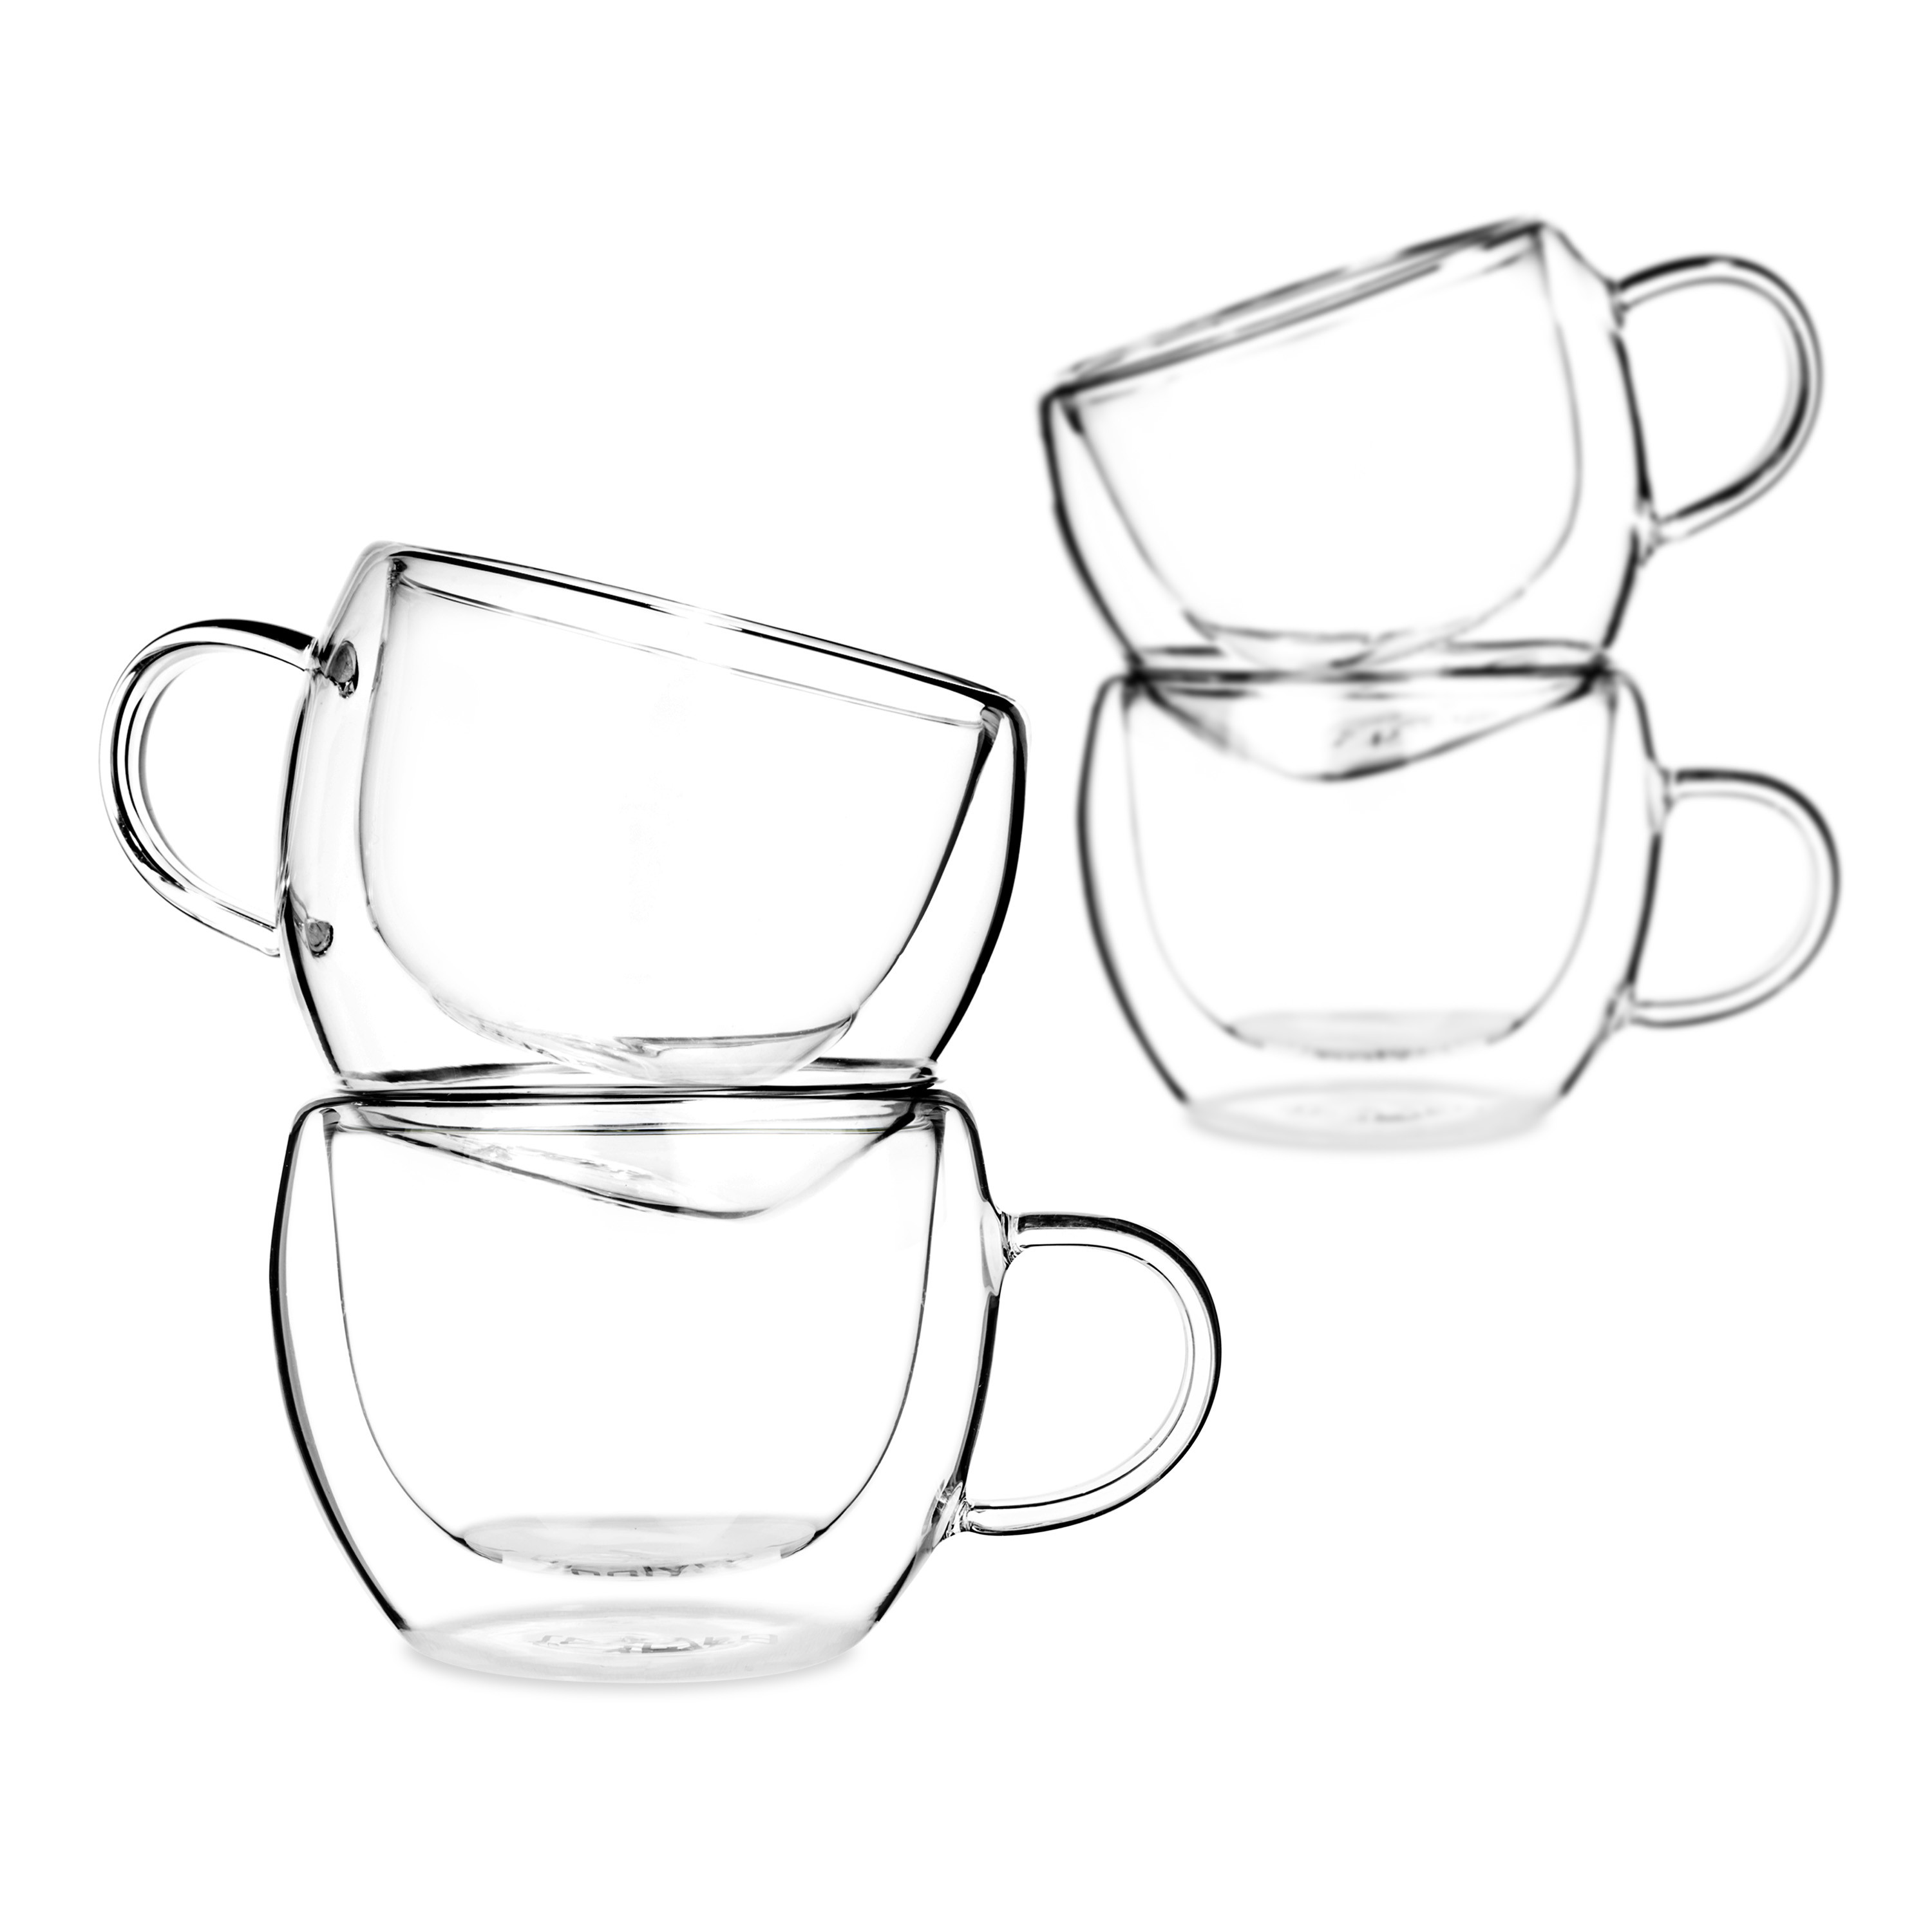 Double Wall Glasses & Saucers, Set of 4